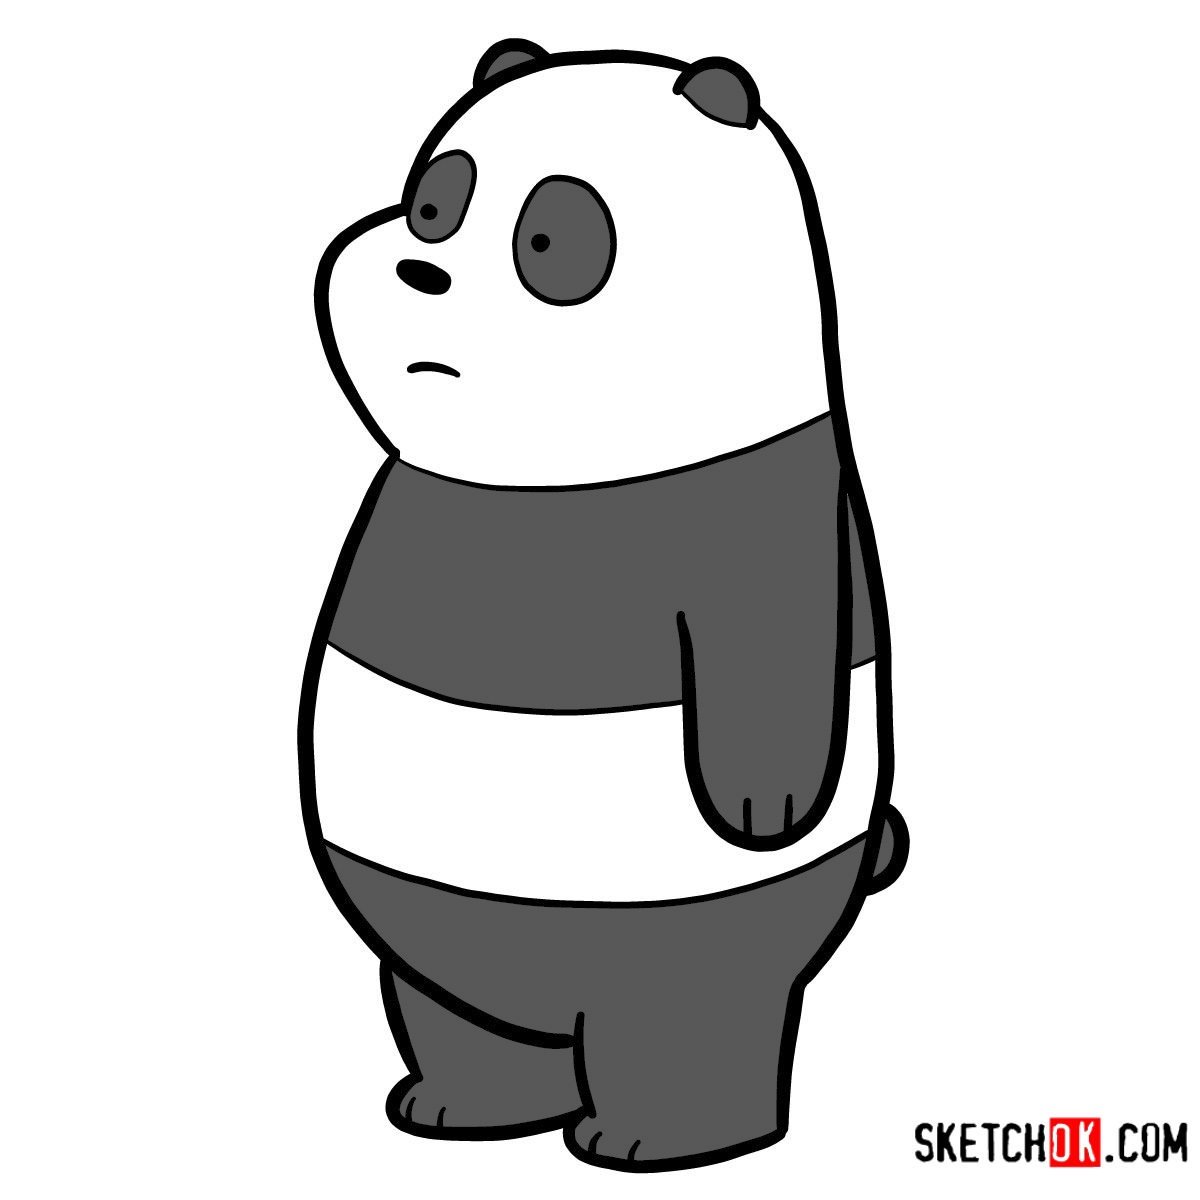 How to draw Panda Bear | We Bare Bears - Sketchok easy drawing guides